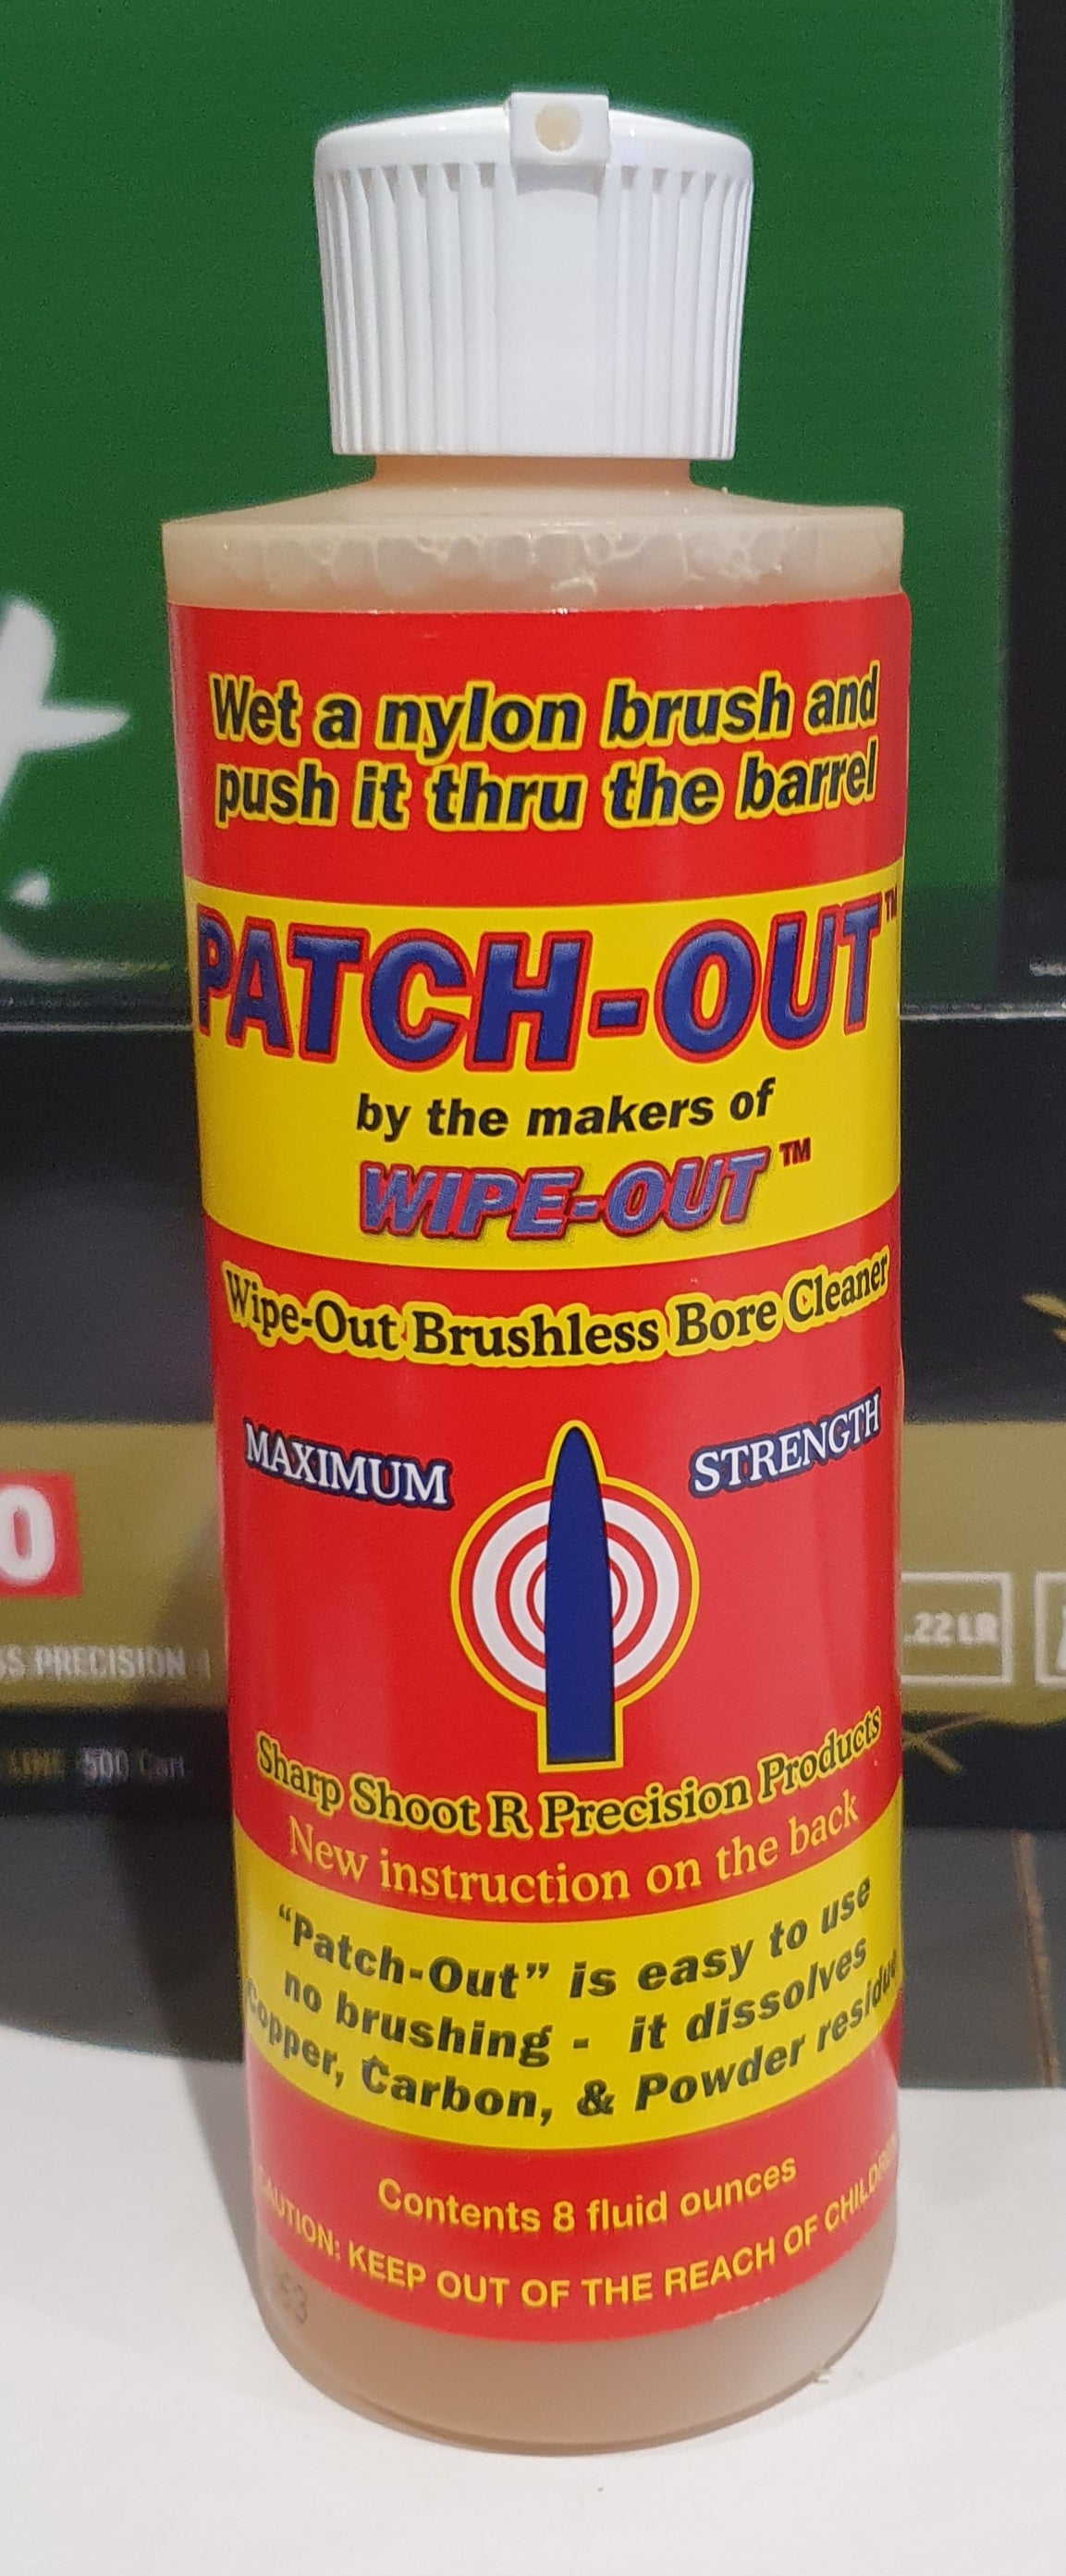 PATCH OUT